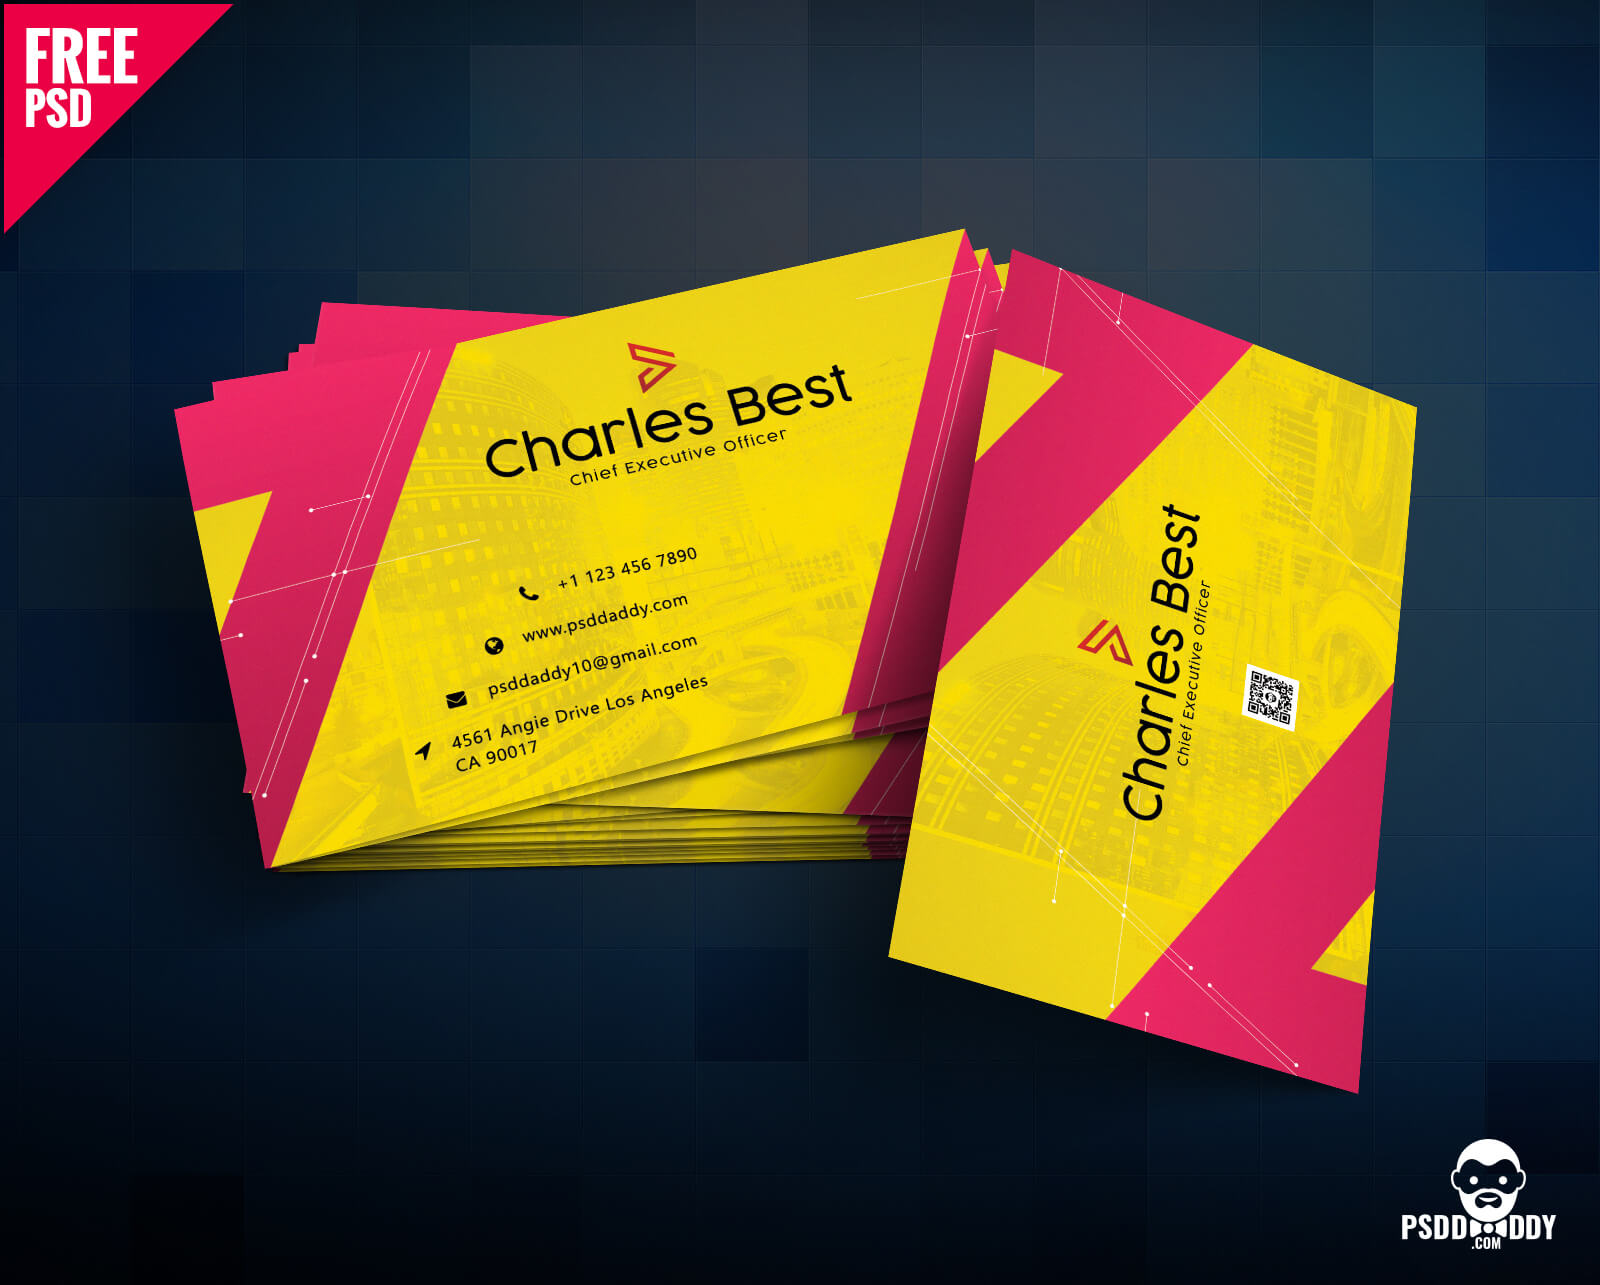 Download] Creative Business Card Free Psd | Psddaddy Throughout Business Card Size Photoshop Template